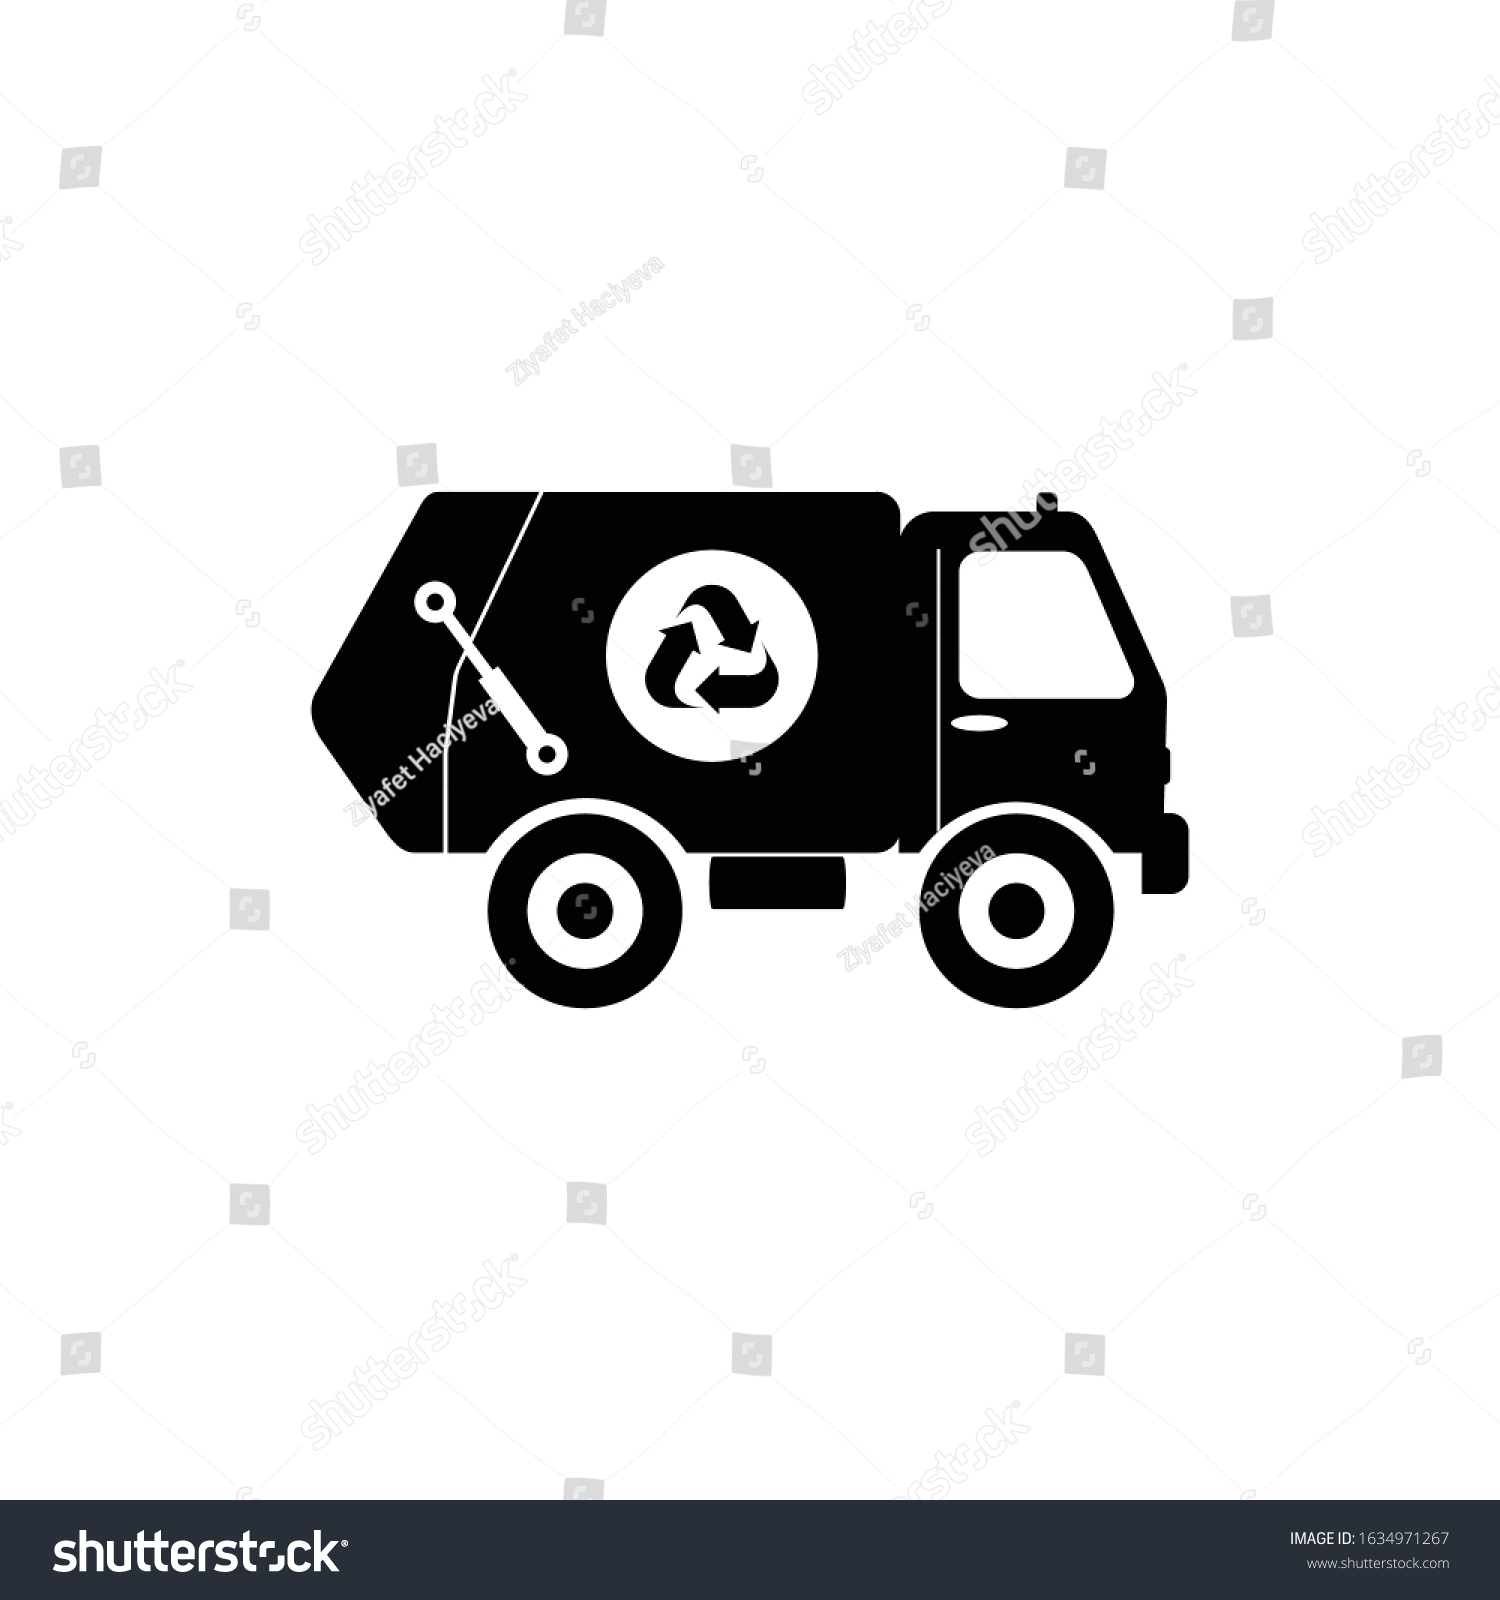 SVG of garbage truck eco icon vector svg